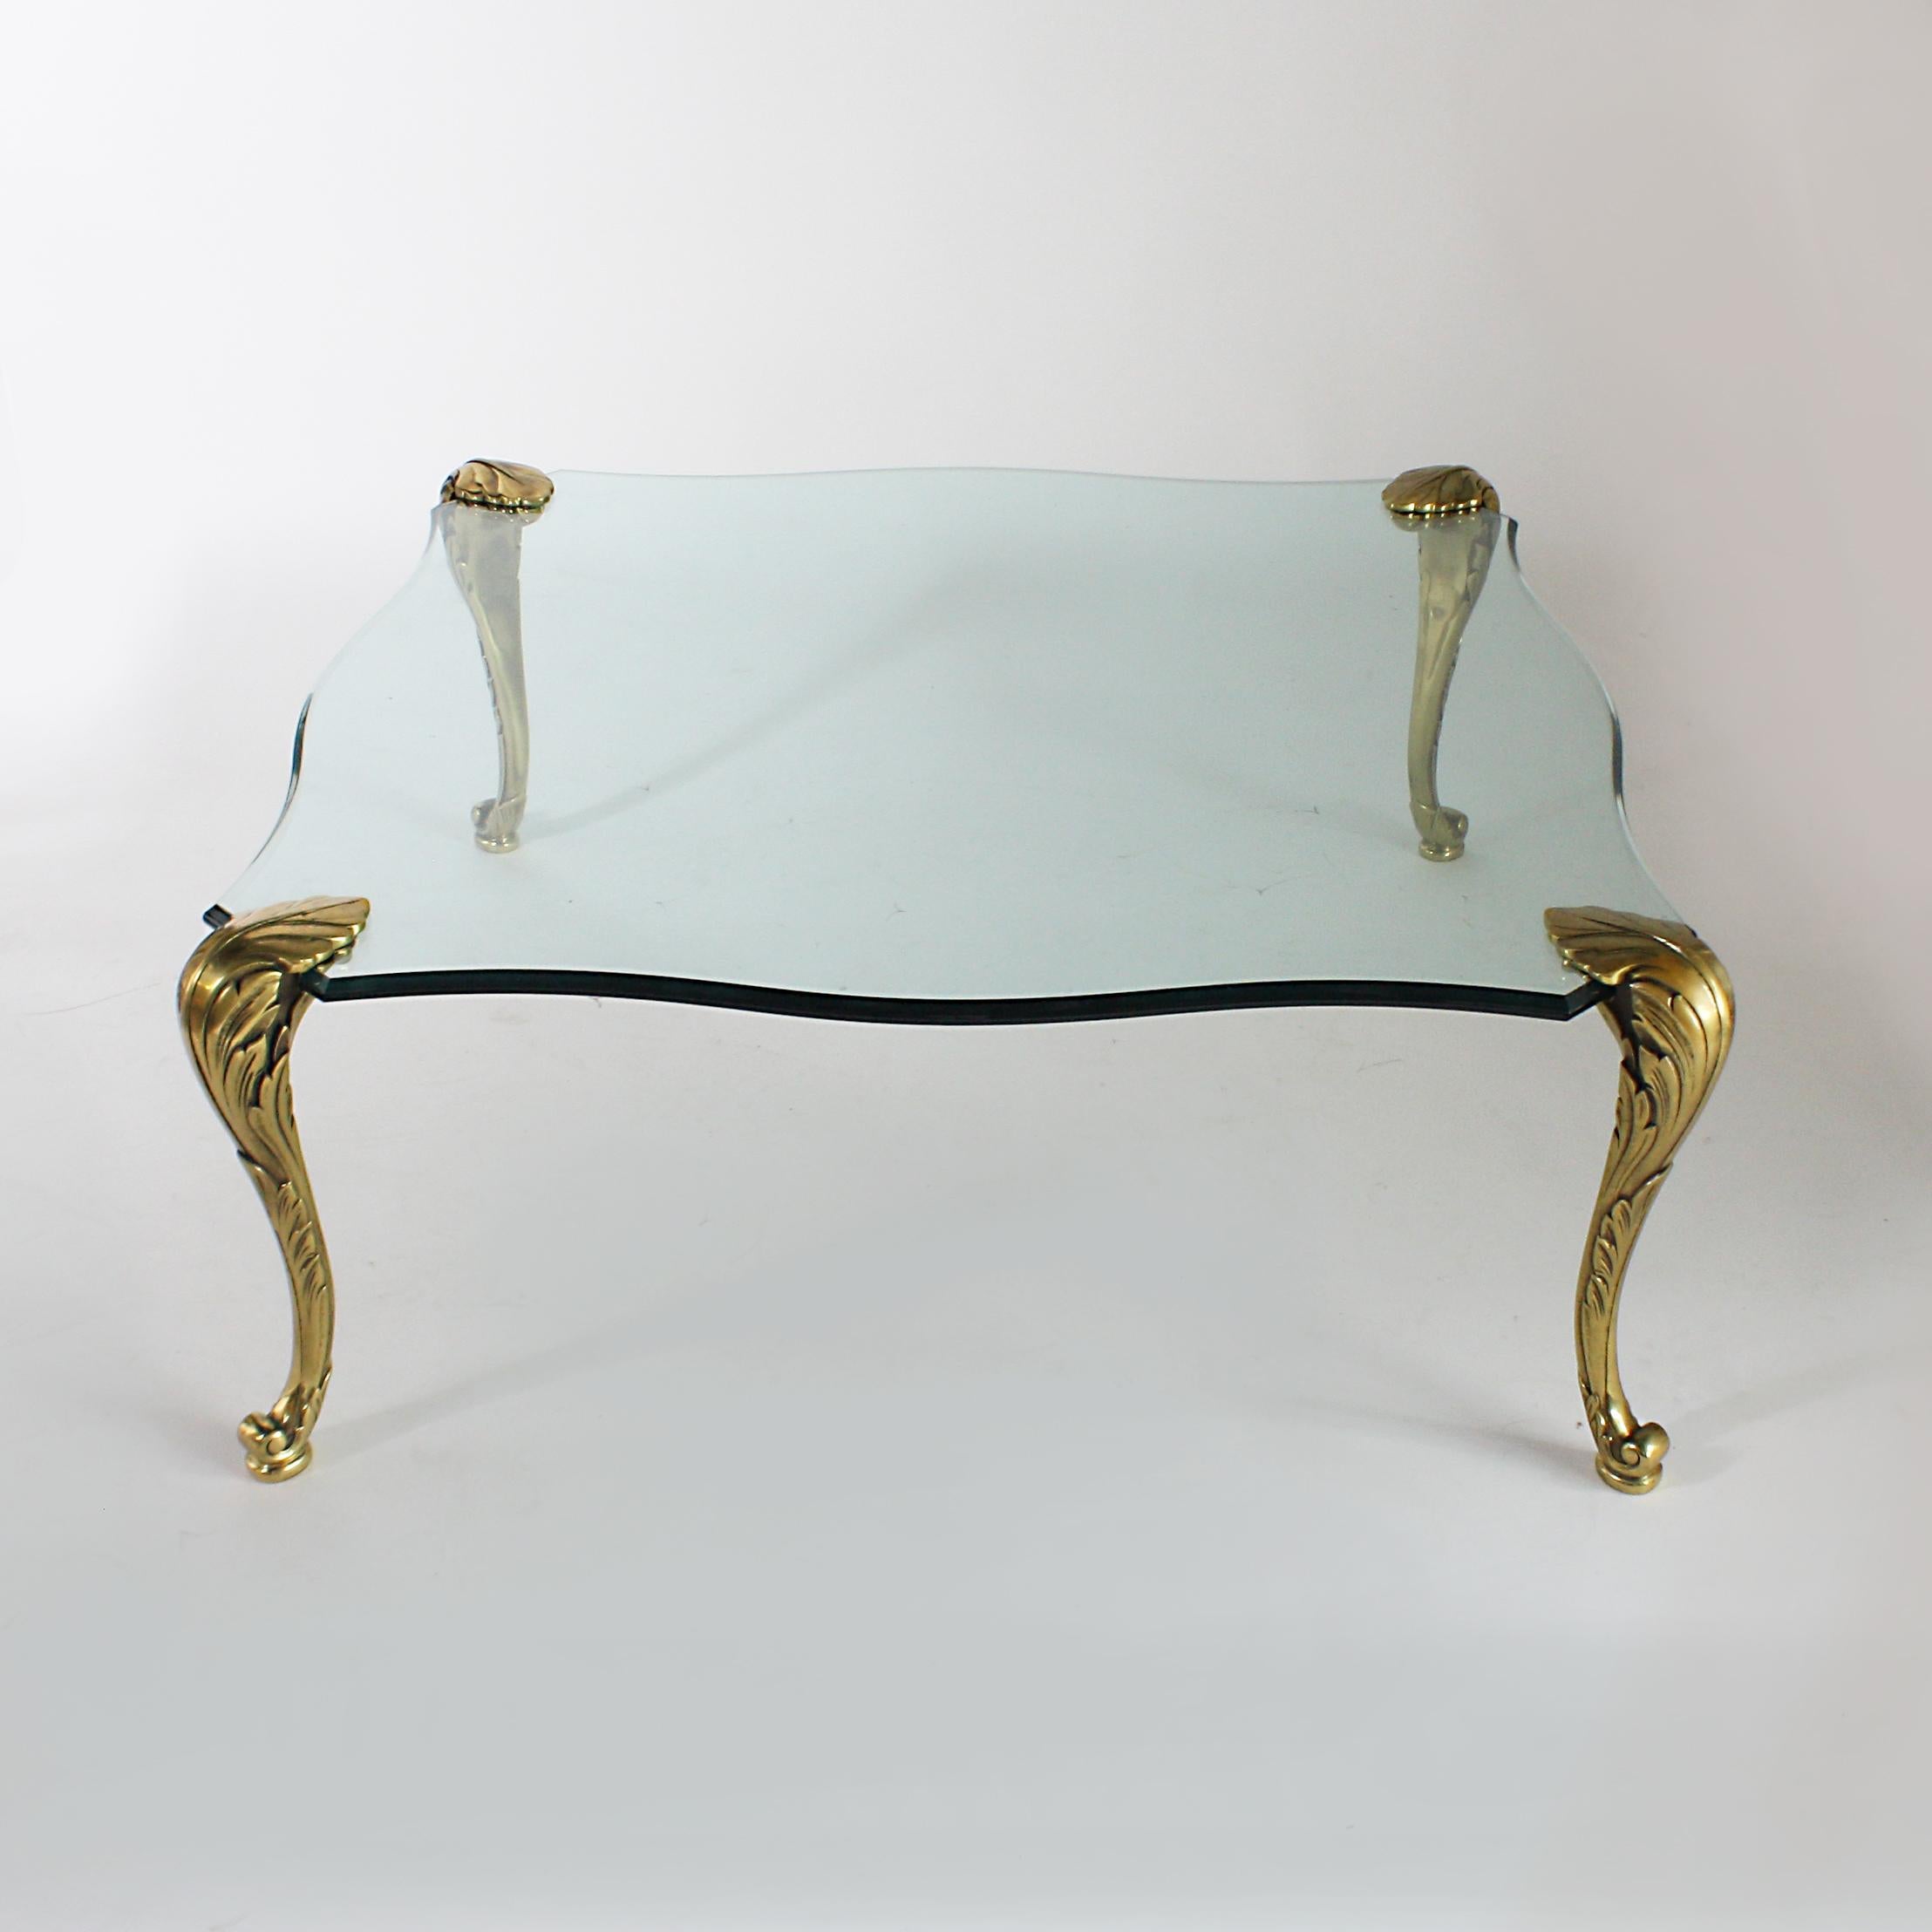 Glass coffee table with brass legs, circa 1940.